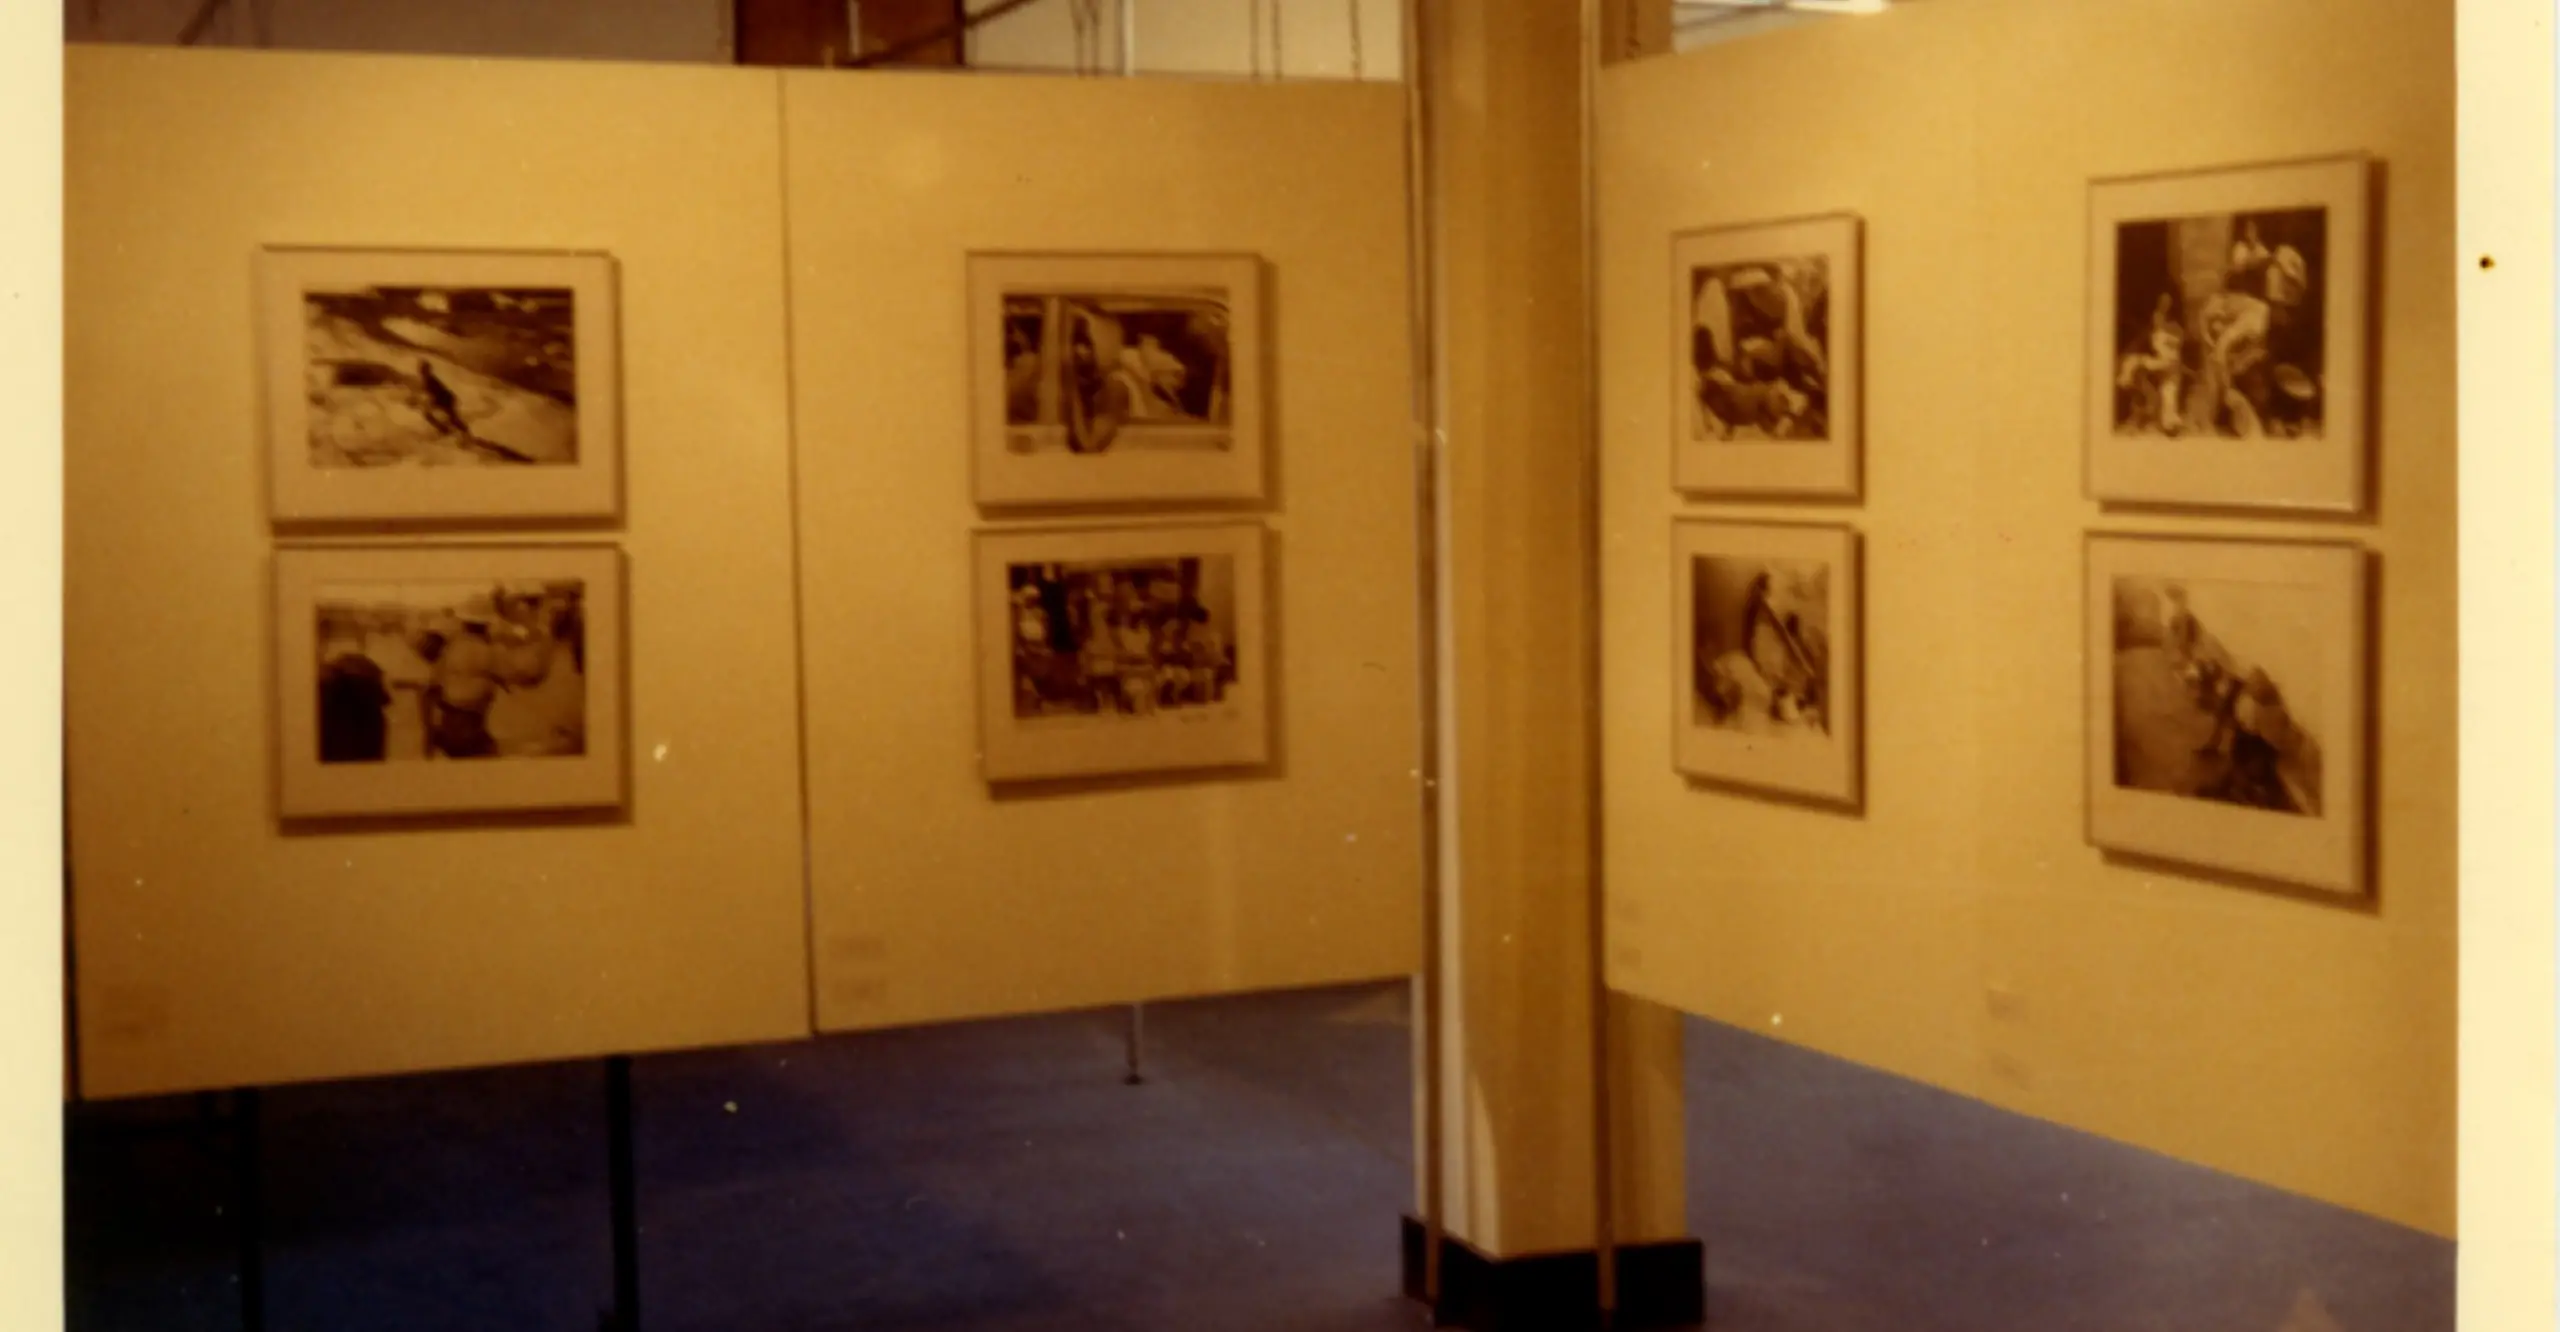 Retrospective: Ian Berry, installation image, 1972. Courtesy The Photographers' Gallery Archive